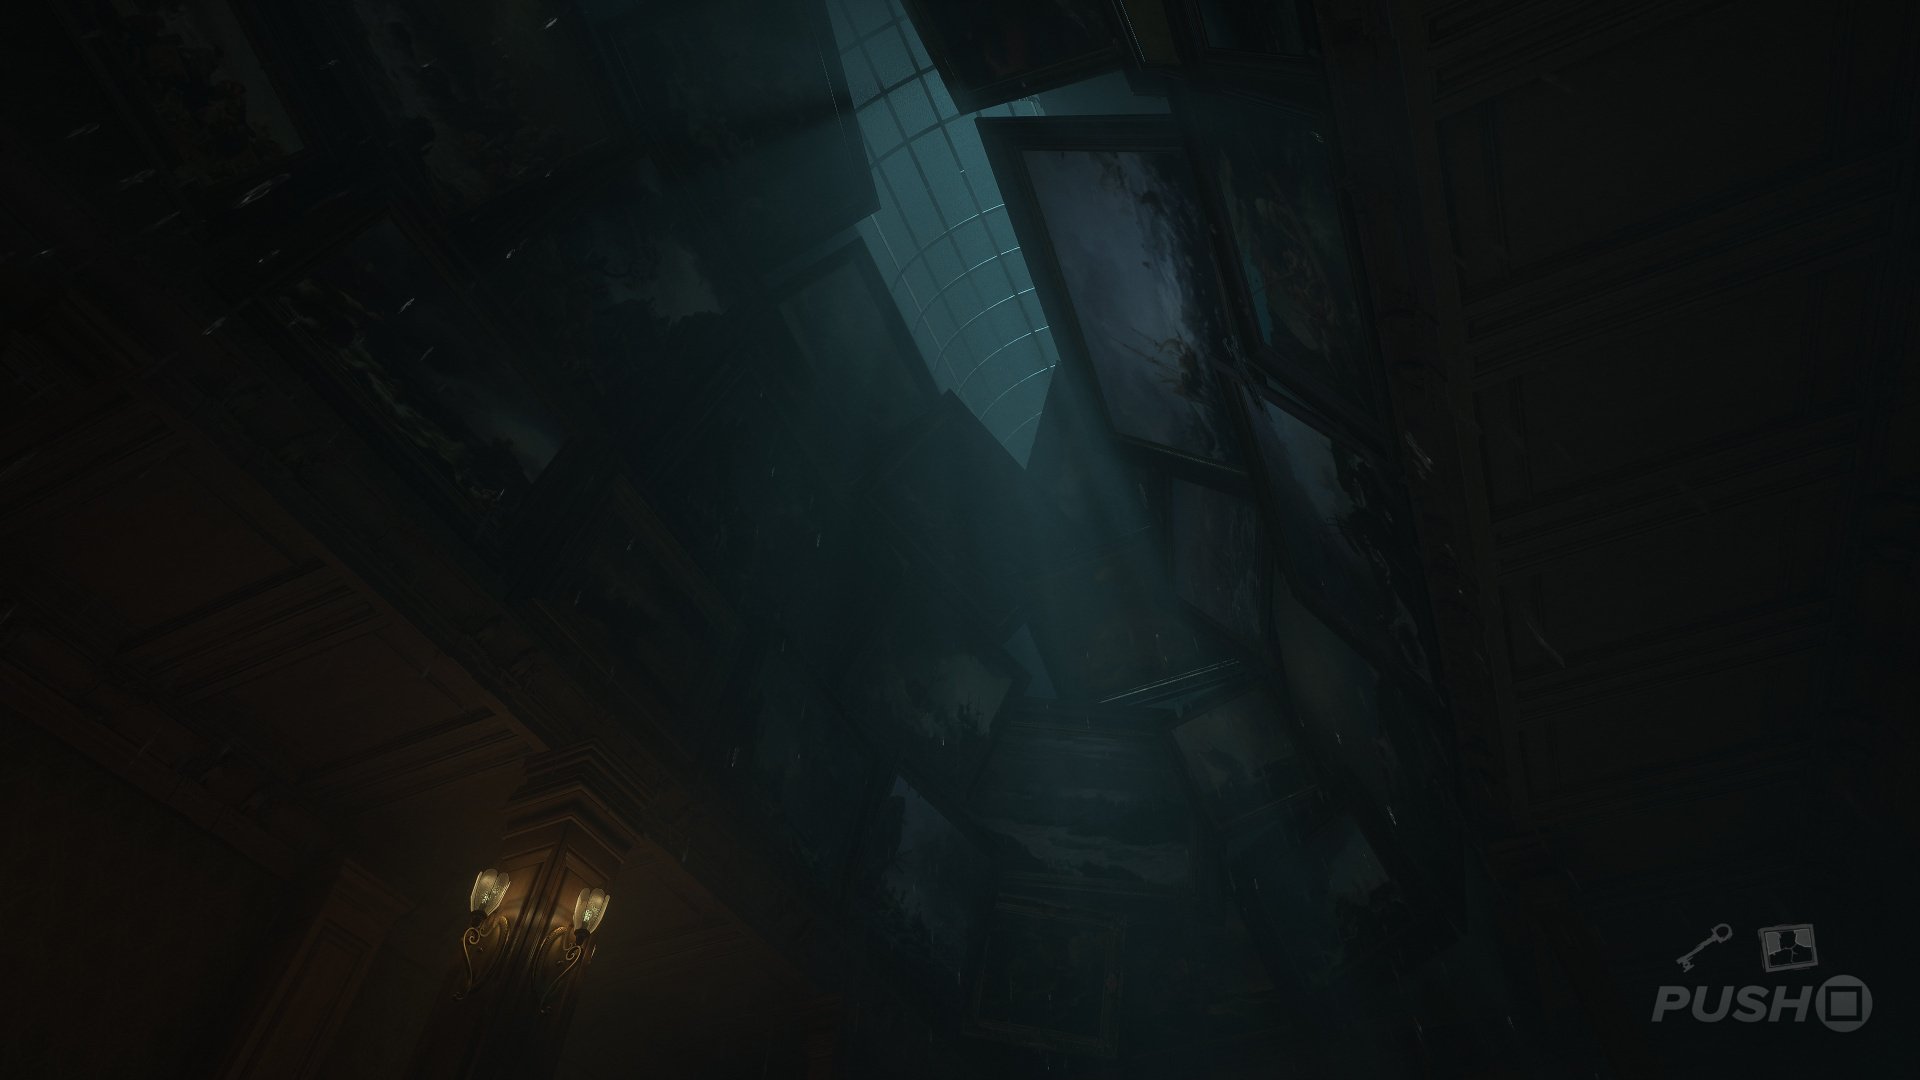 Layers of Fear Review (PS5)